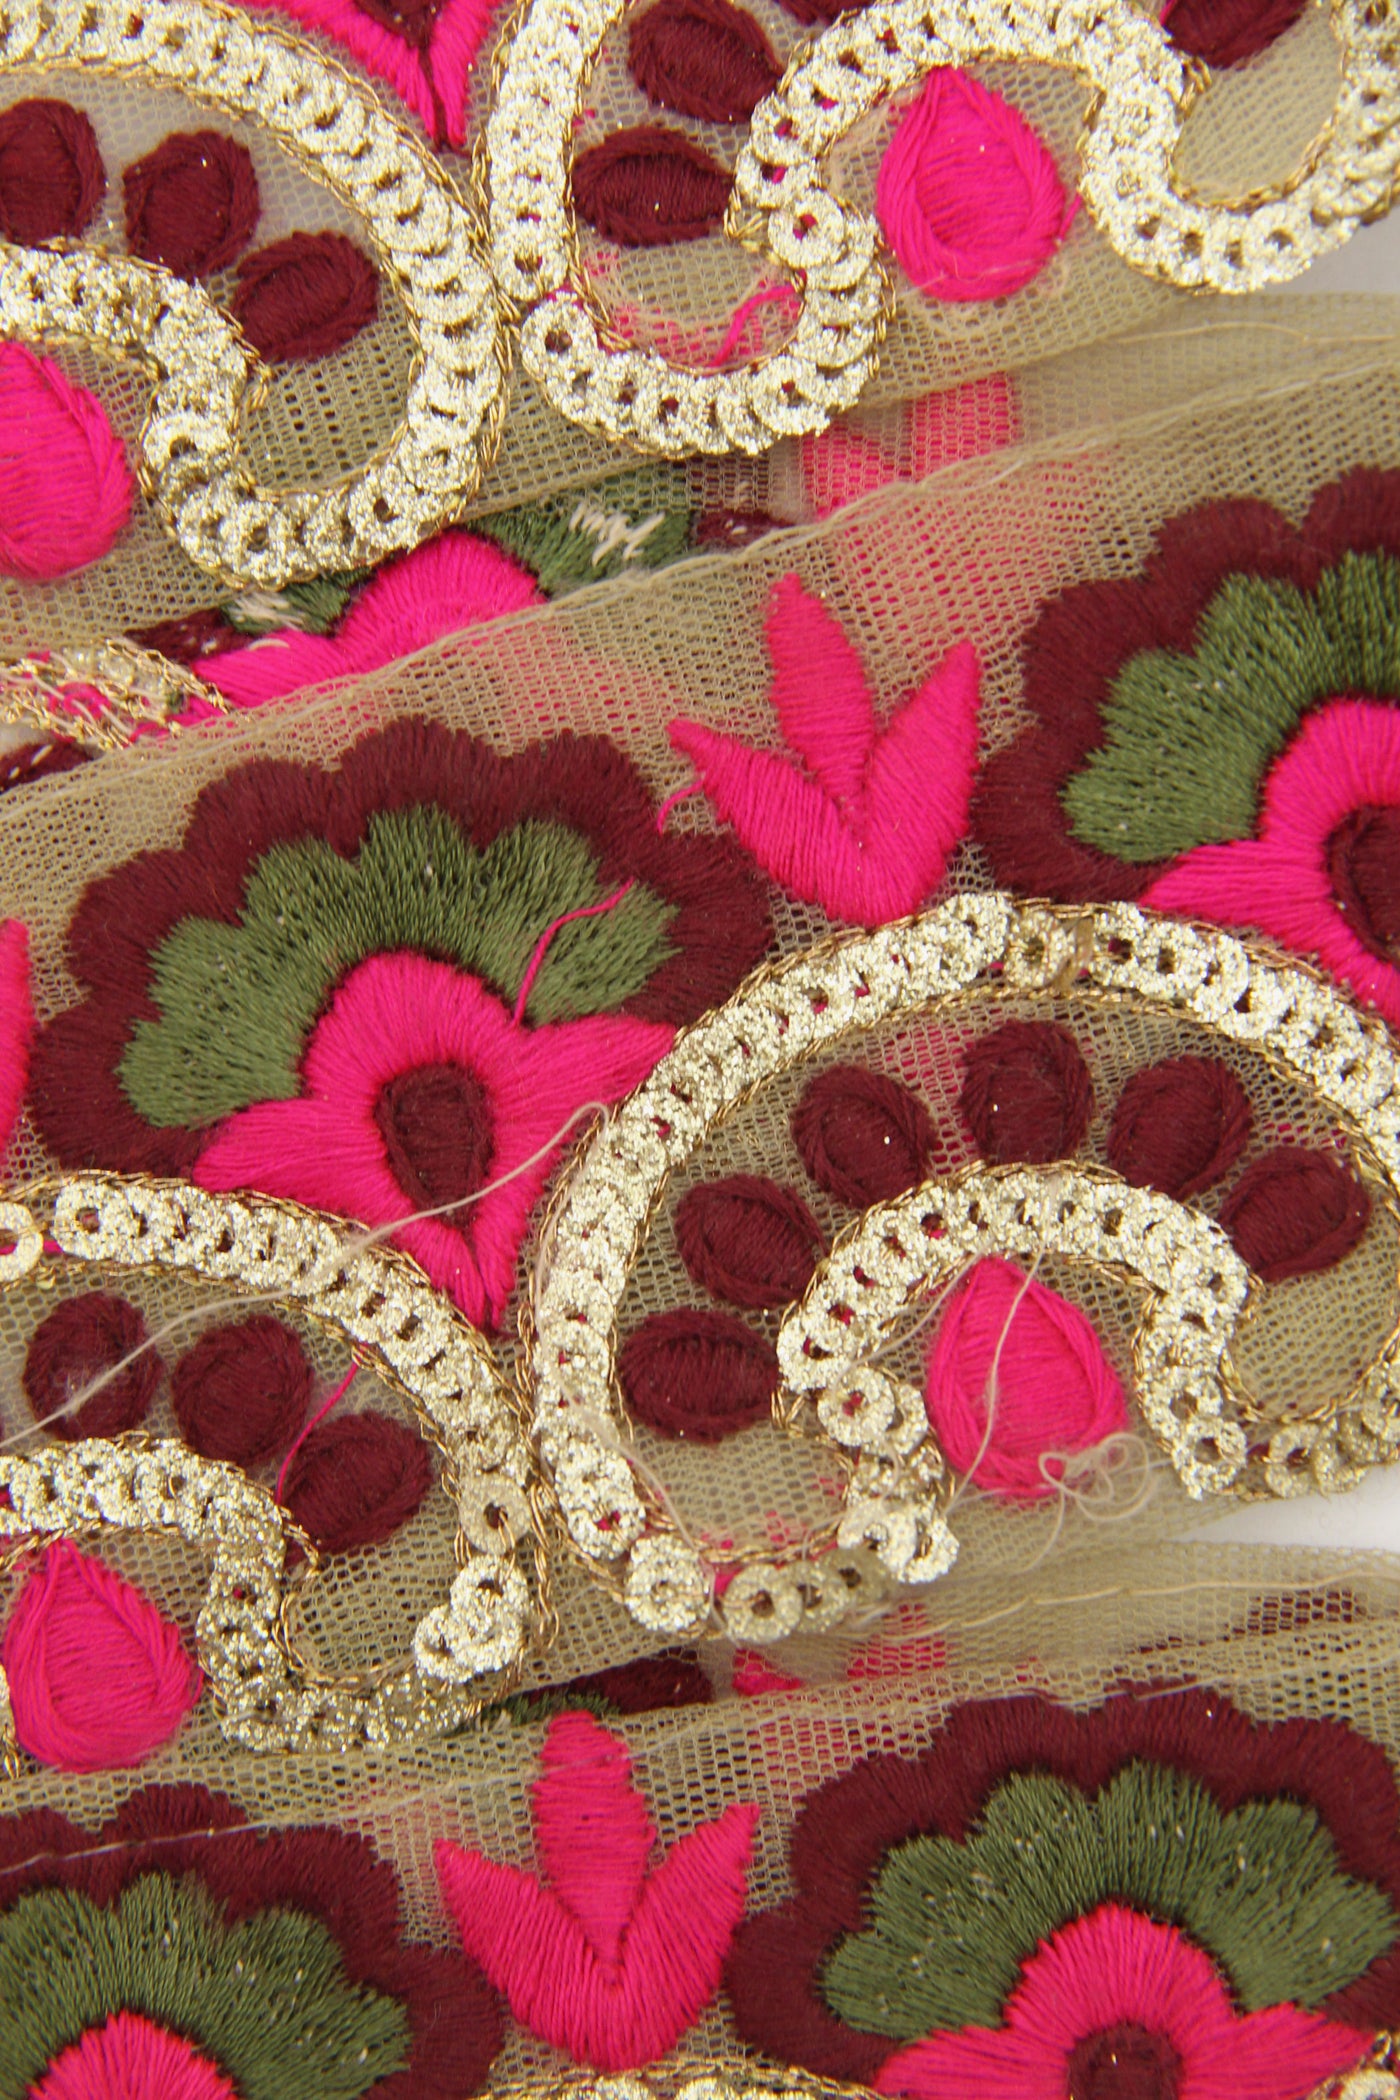 Metallic Valentine Floral Ribbon: 2.25" Tan, Gold, Burgundy Mesh Trim by the yard from India